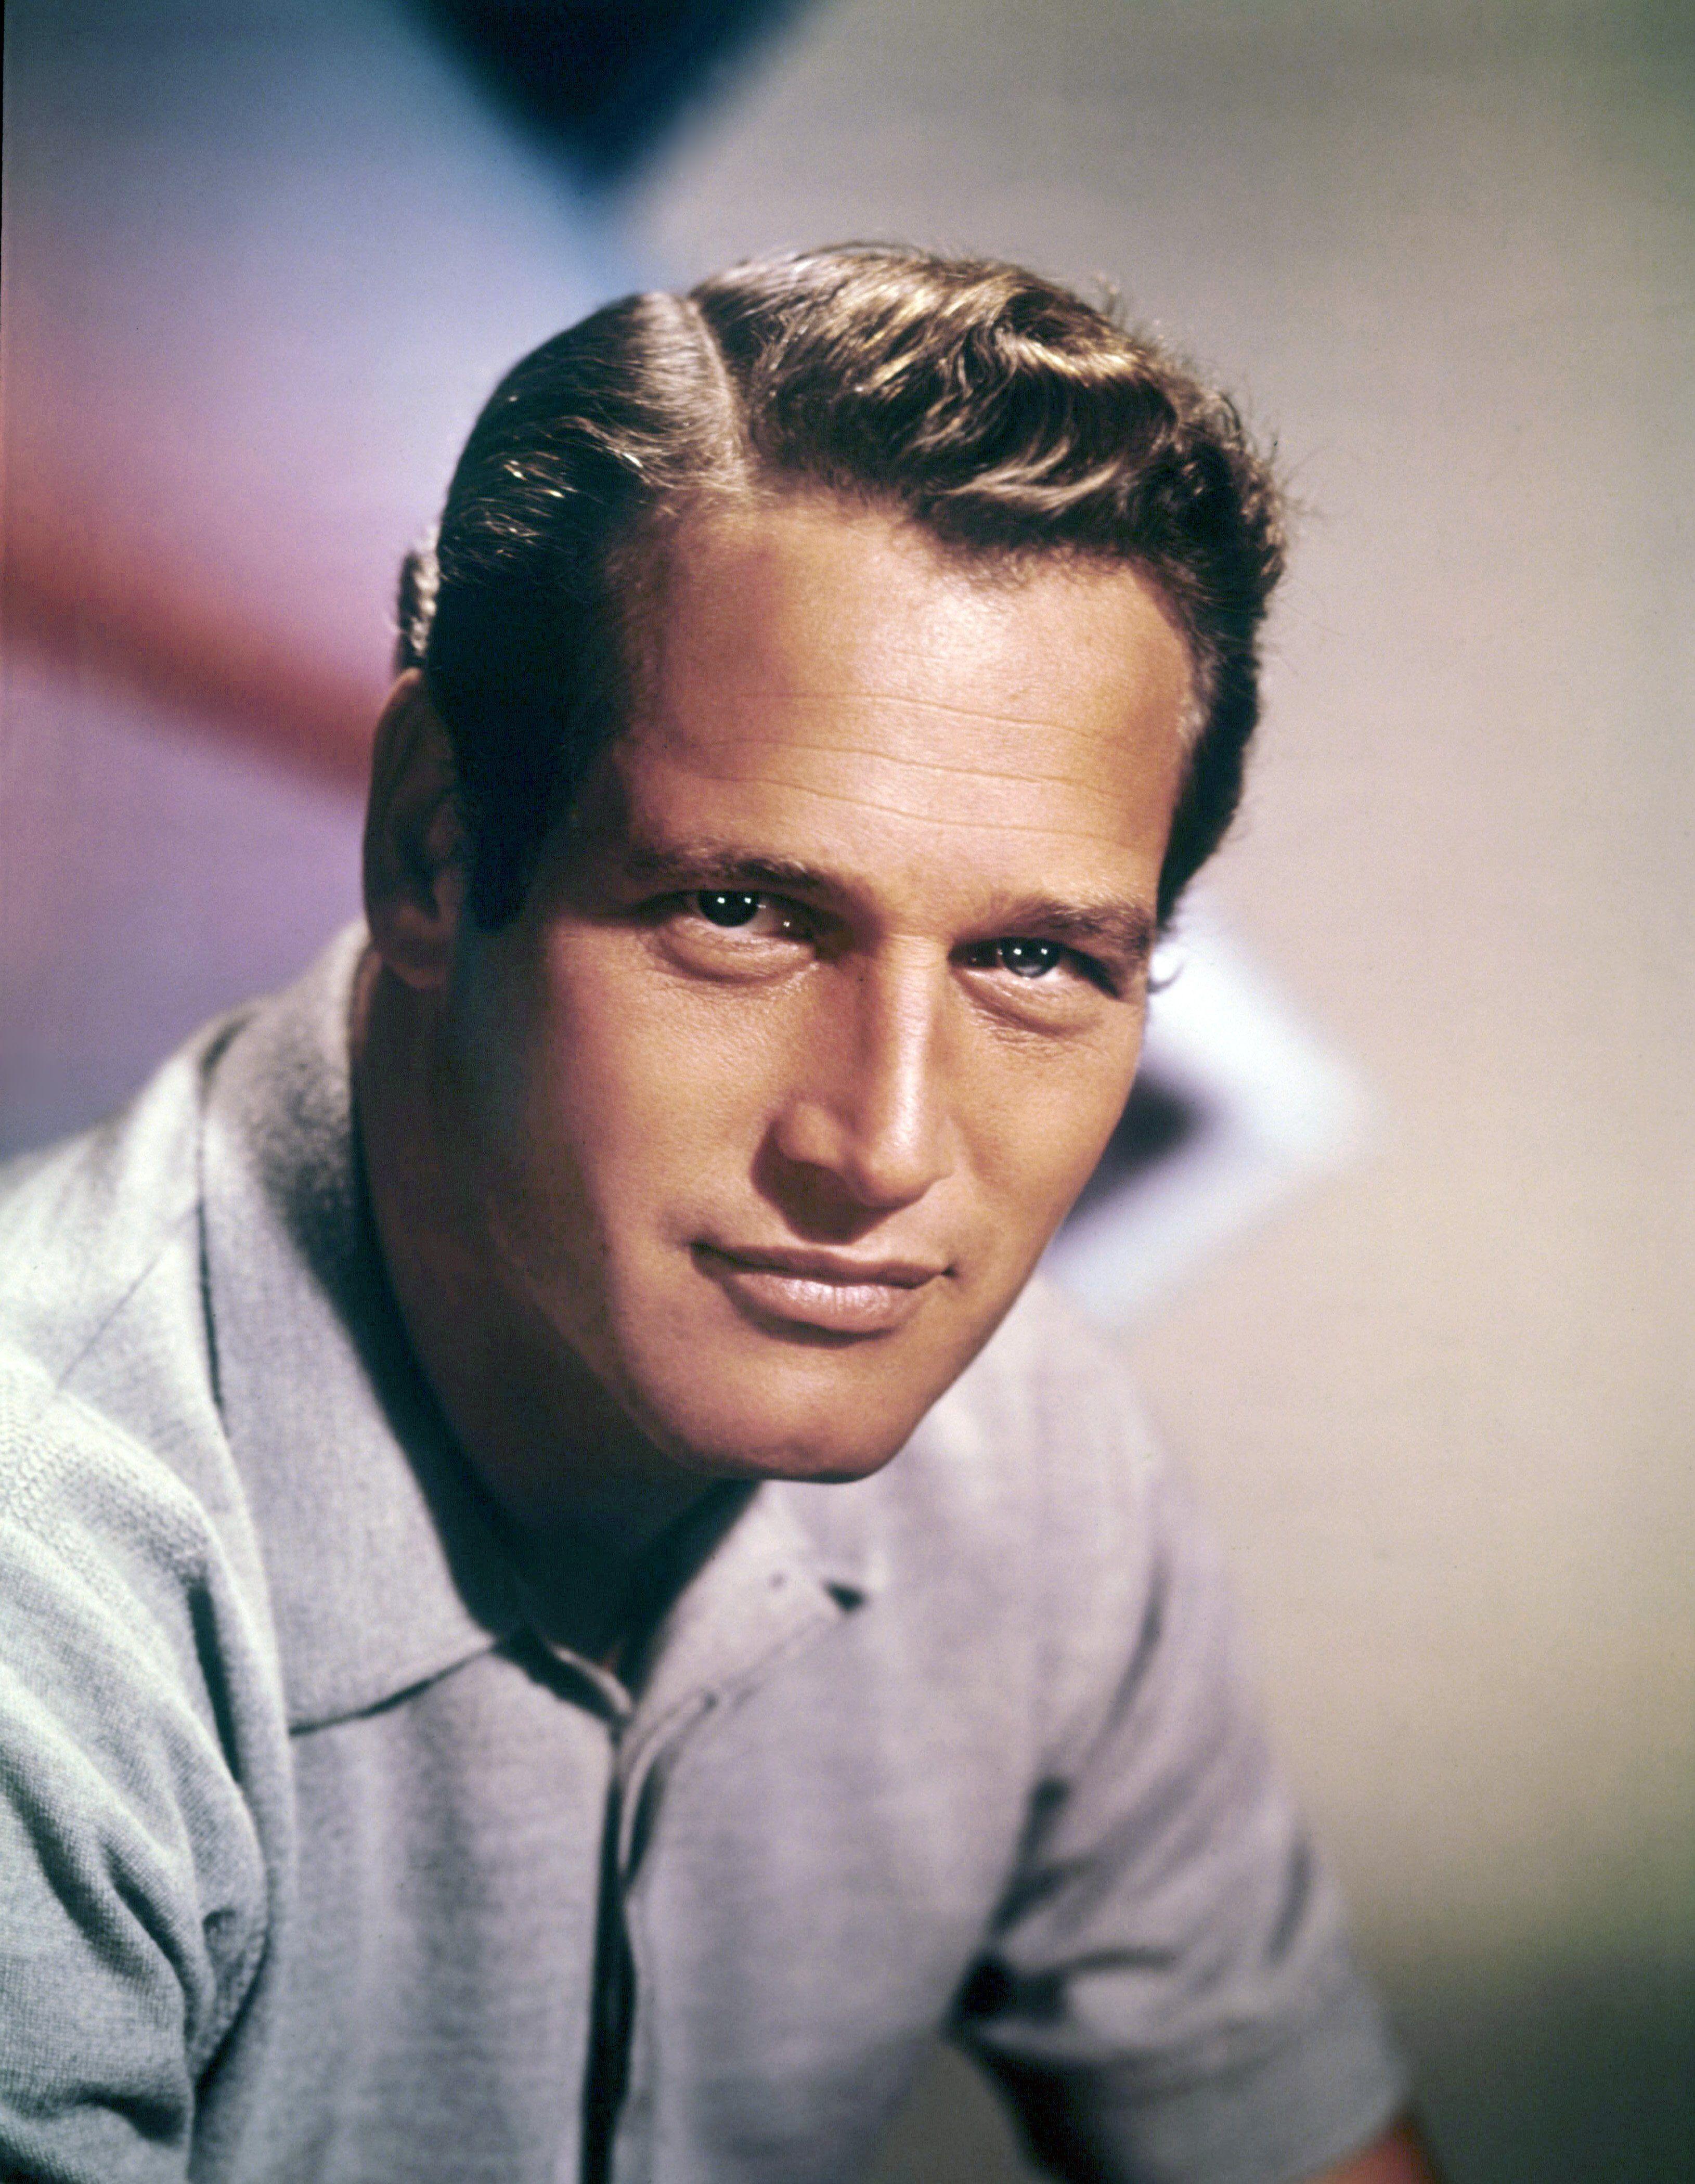 Awesome Paul Newman HD Wallpaper Free Download